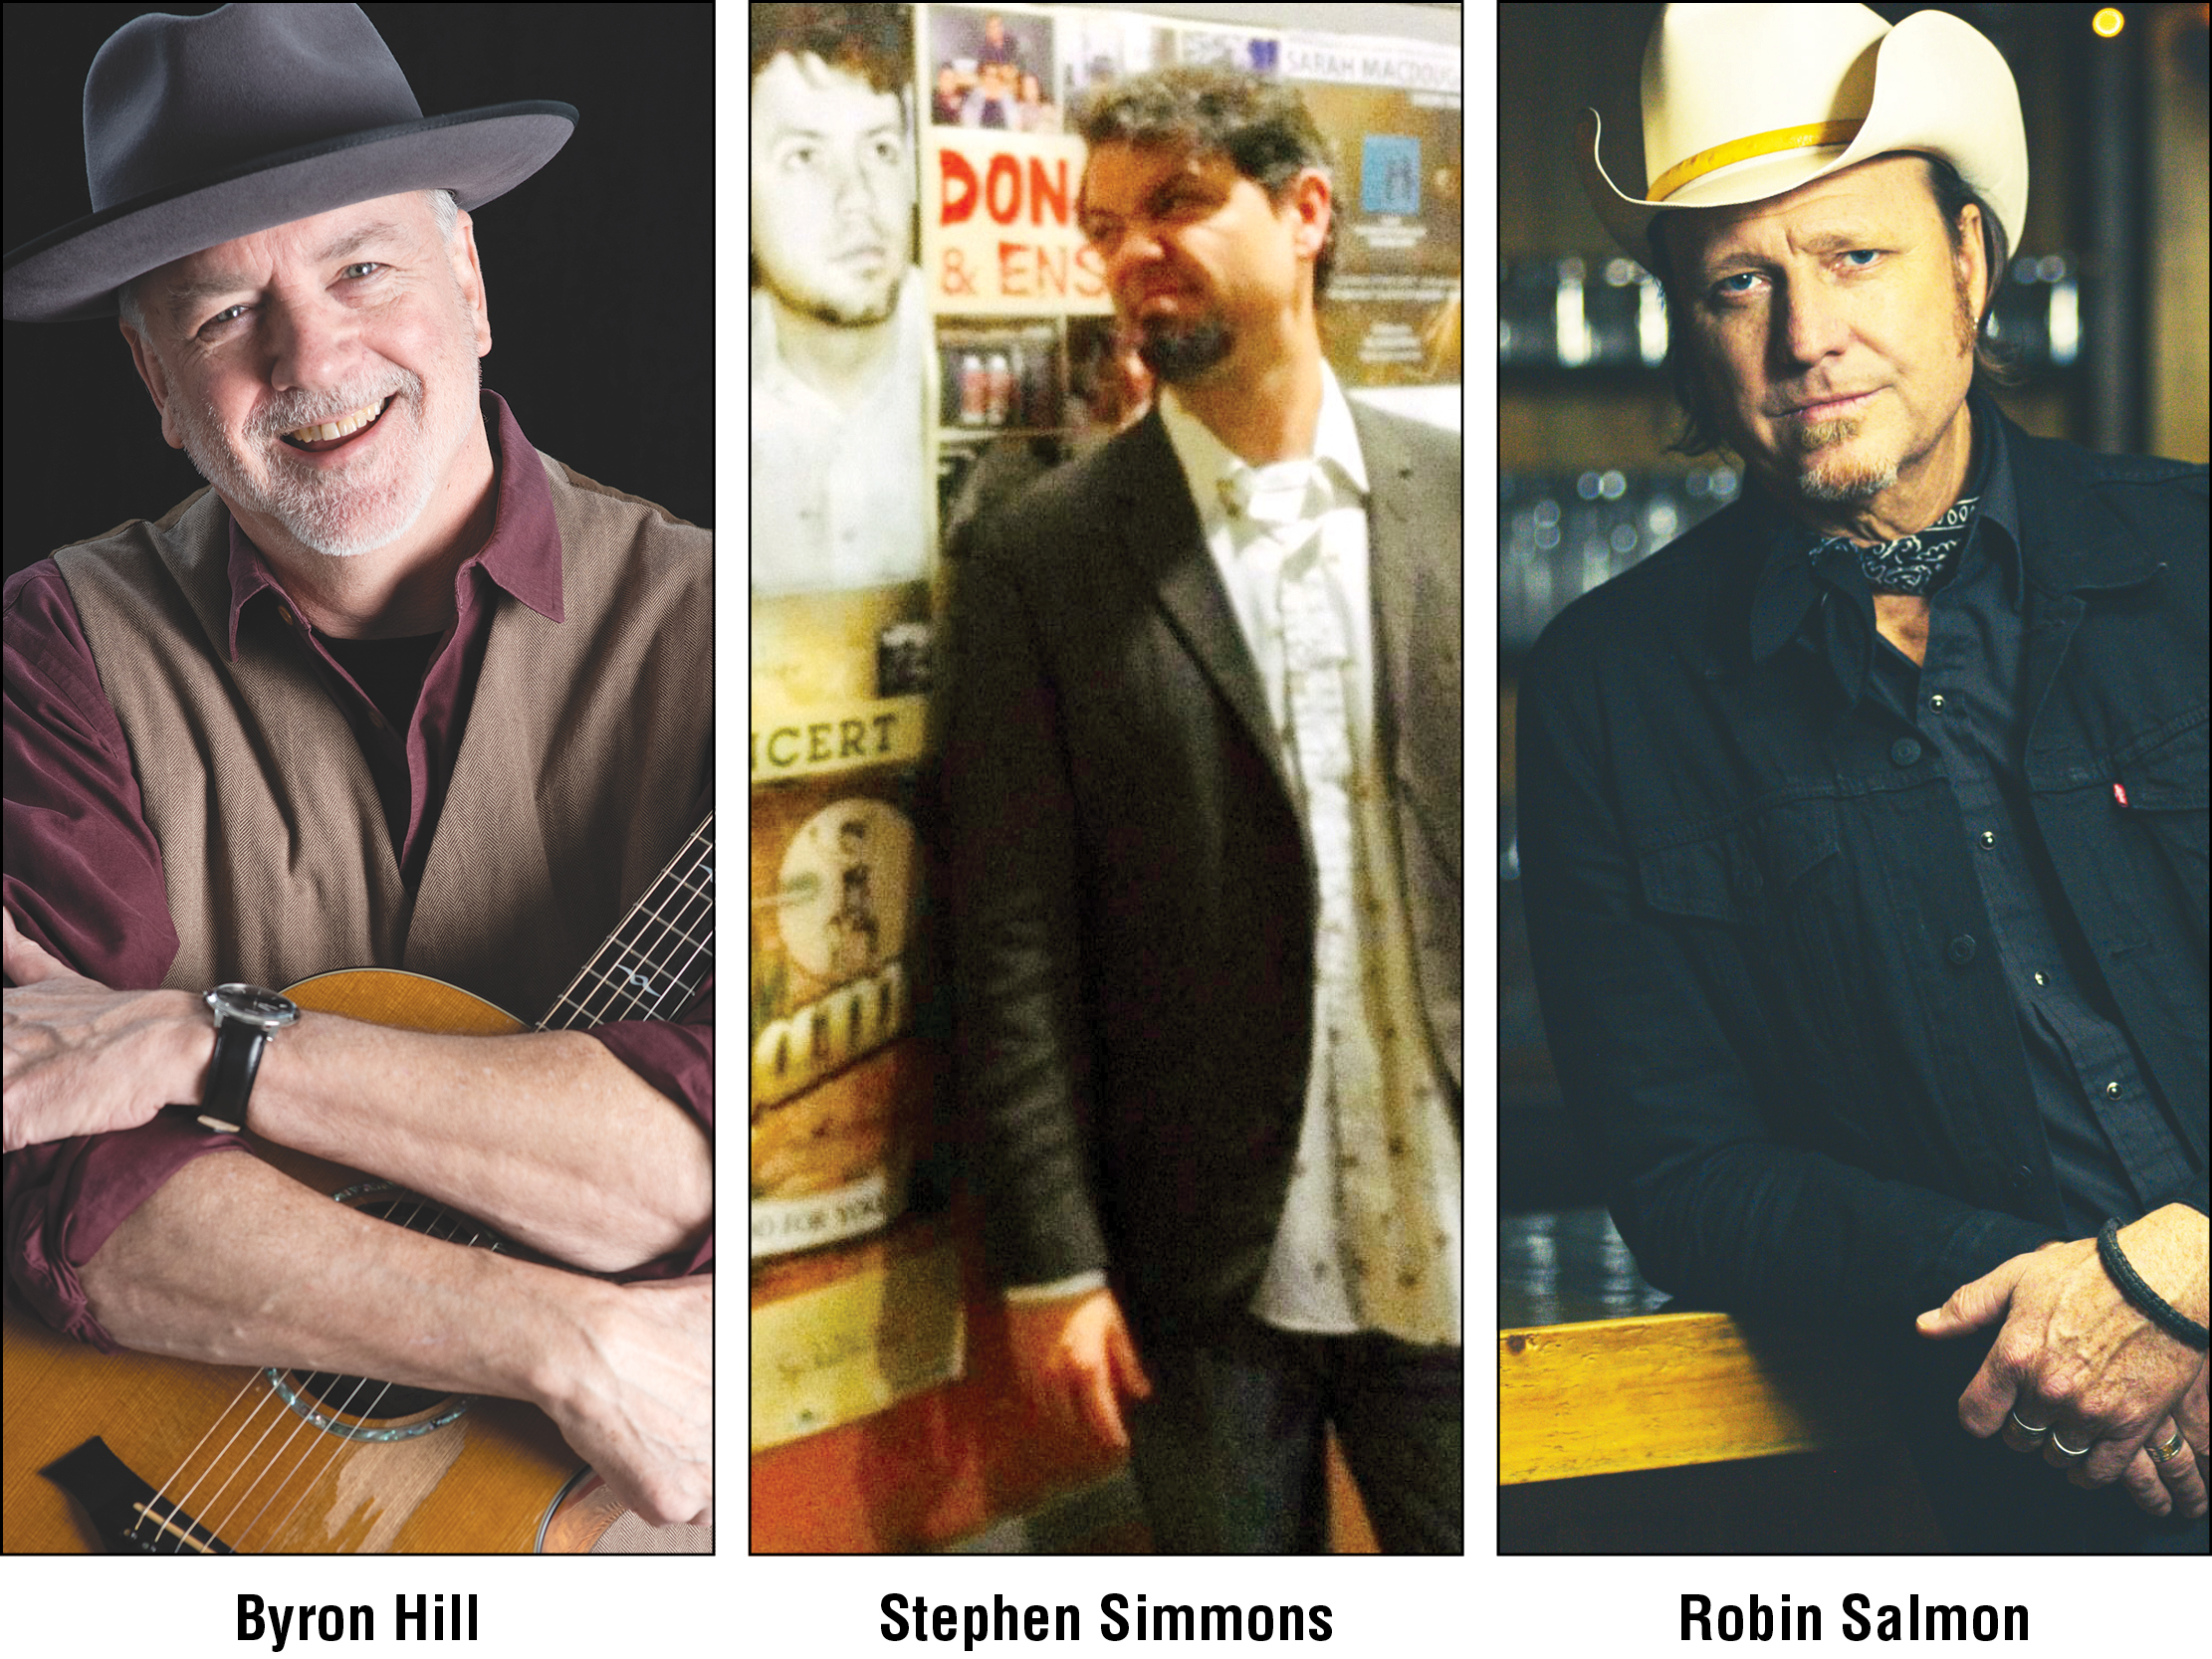 The Oct. 29 Blue Betty Sessions concert will feature Nashville singer/songwriters Byron Hill and Stephen Simmons alongside Ellijay’s Robin Salmon. The show begins at 7 p.m. 